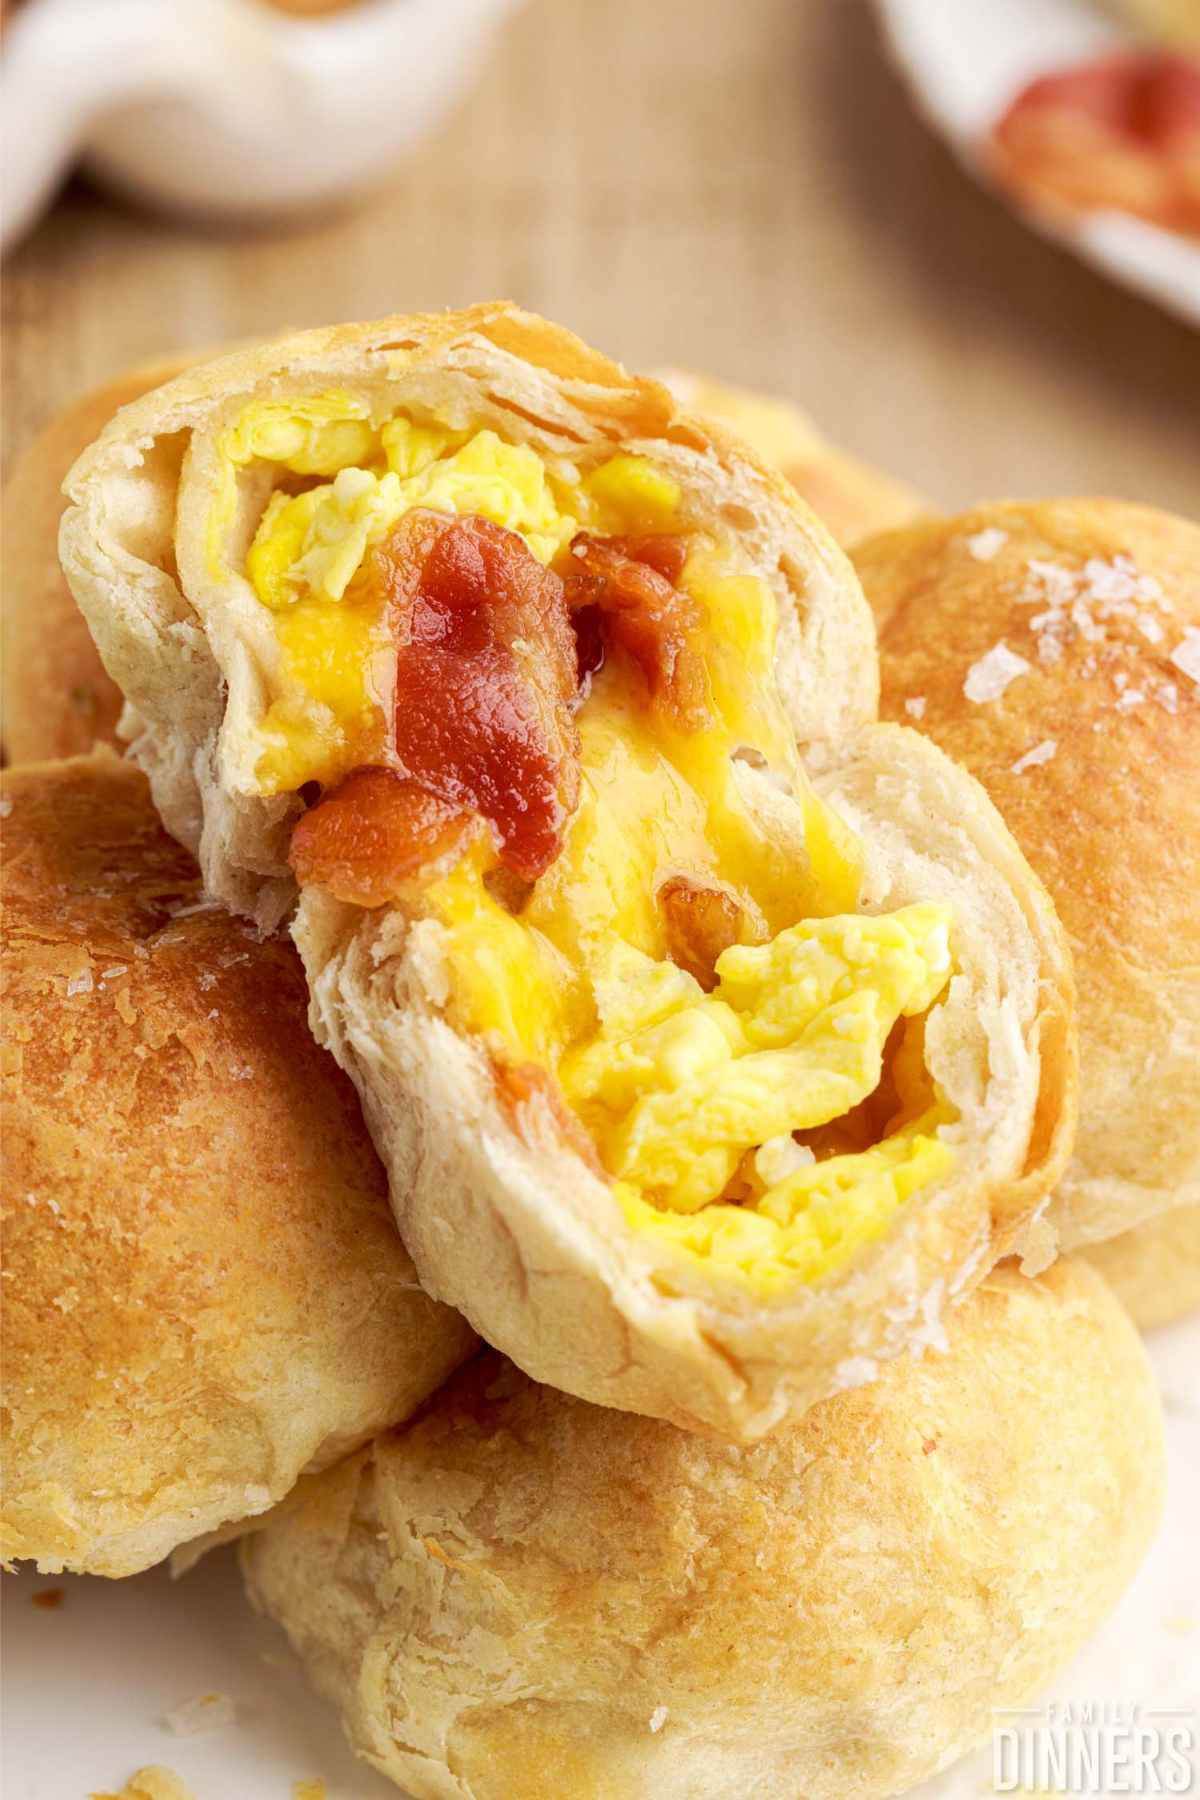 Opened ball of scrambled egg, cheese and bacon surrounded by golden biscuit. 